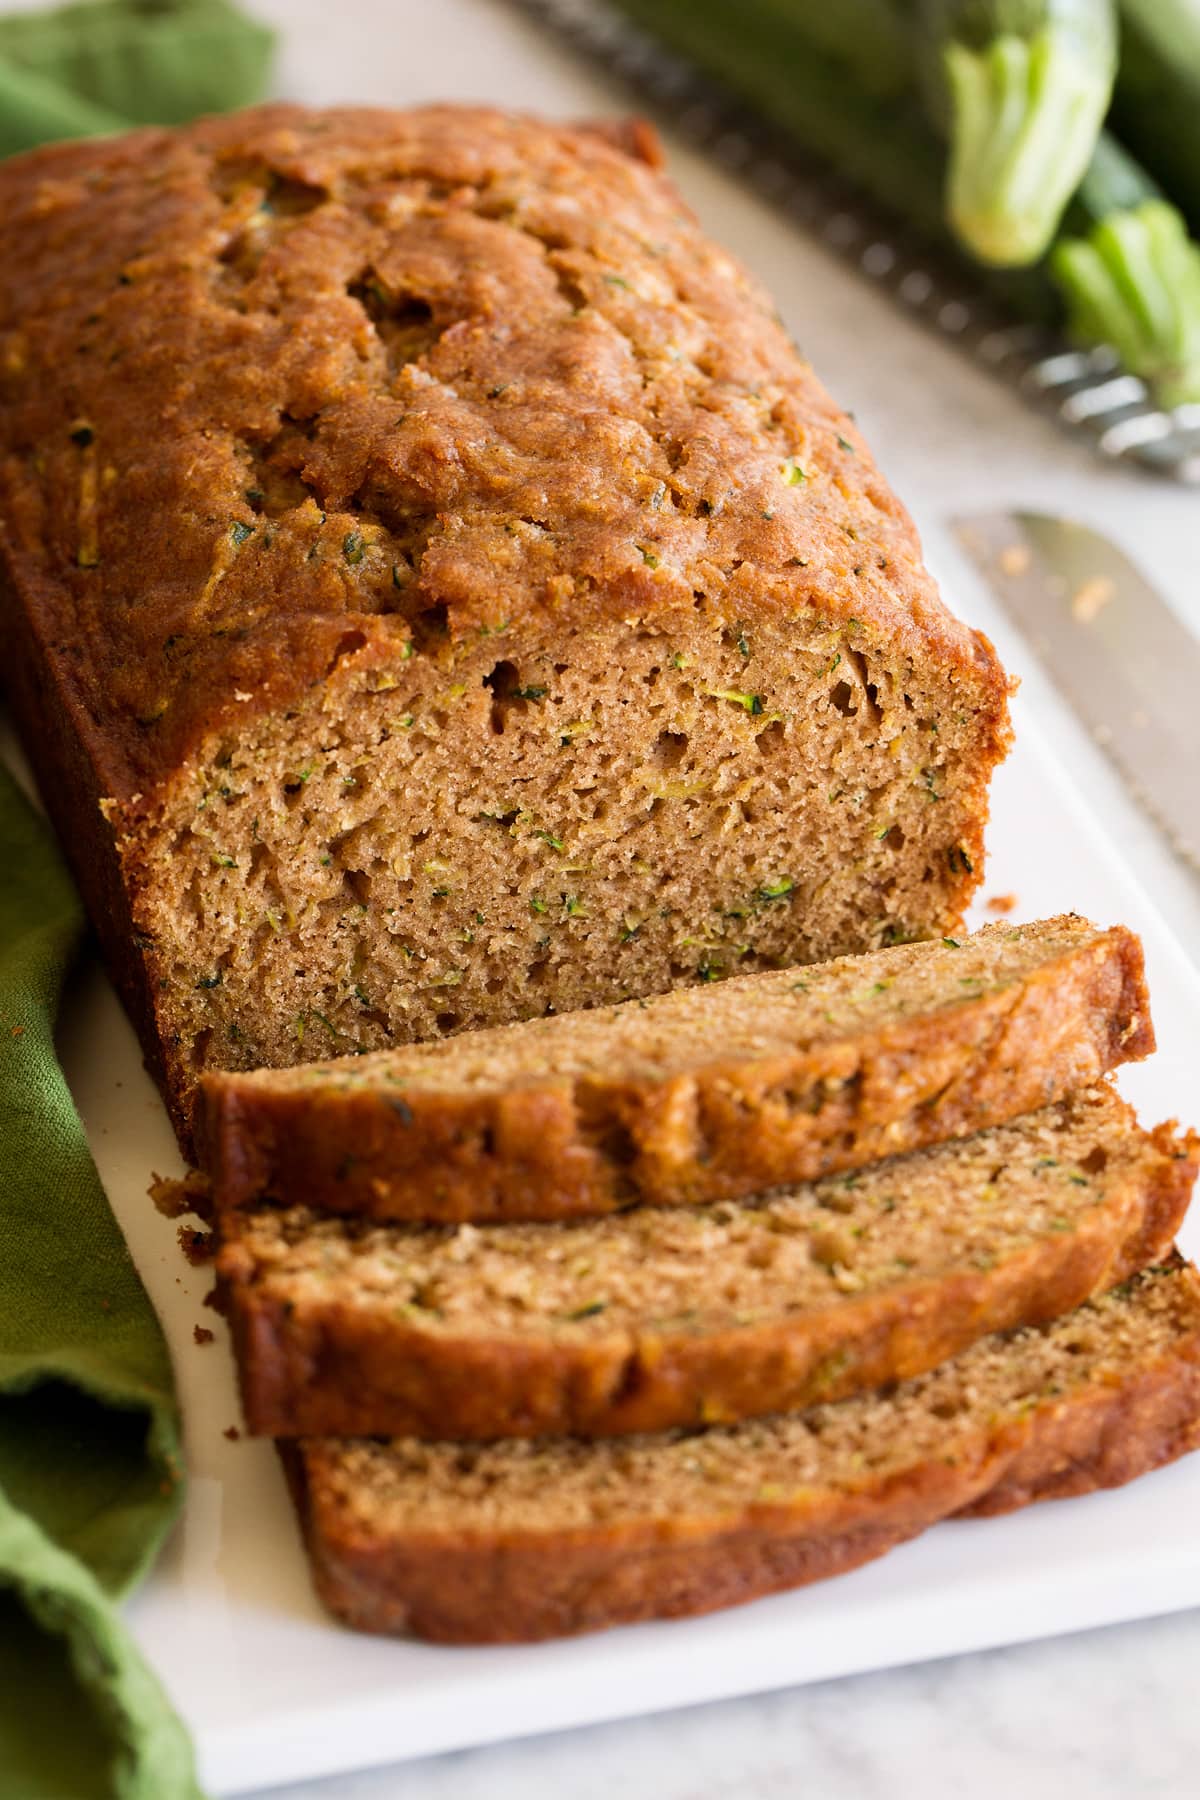 Loaf of zucchini bread shown with a few slices cut.